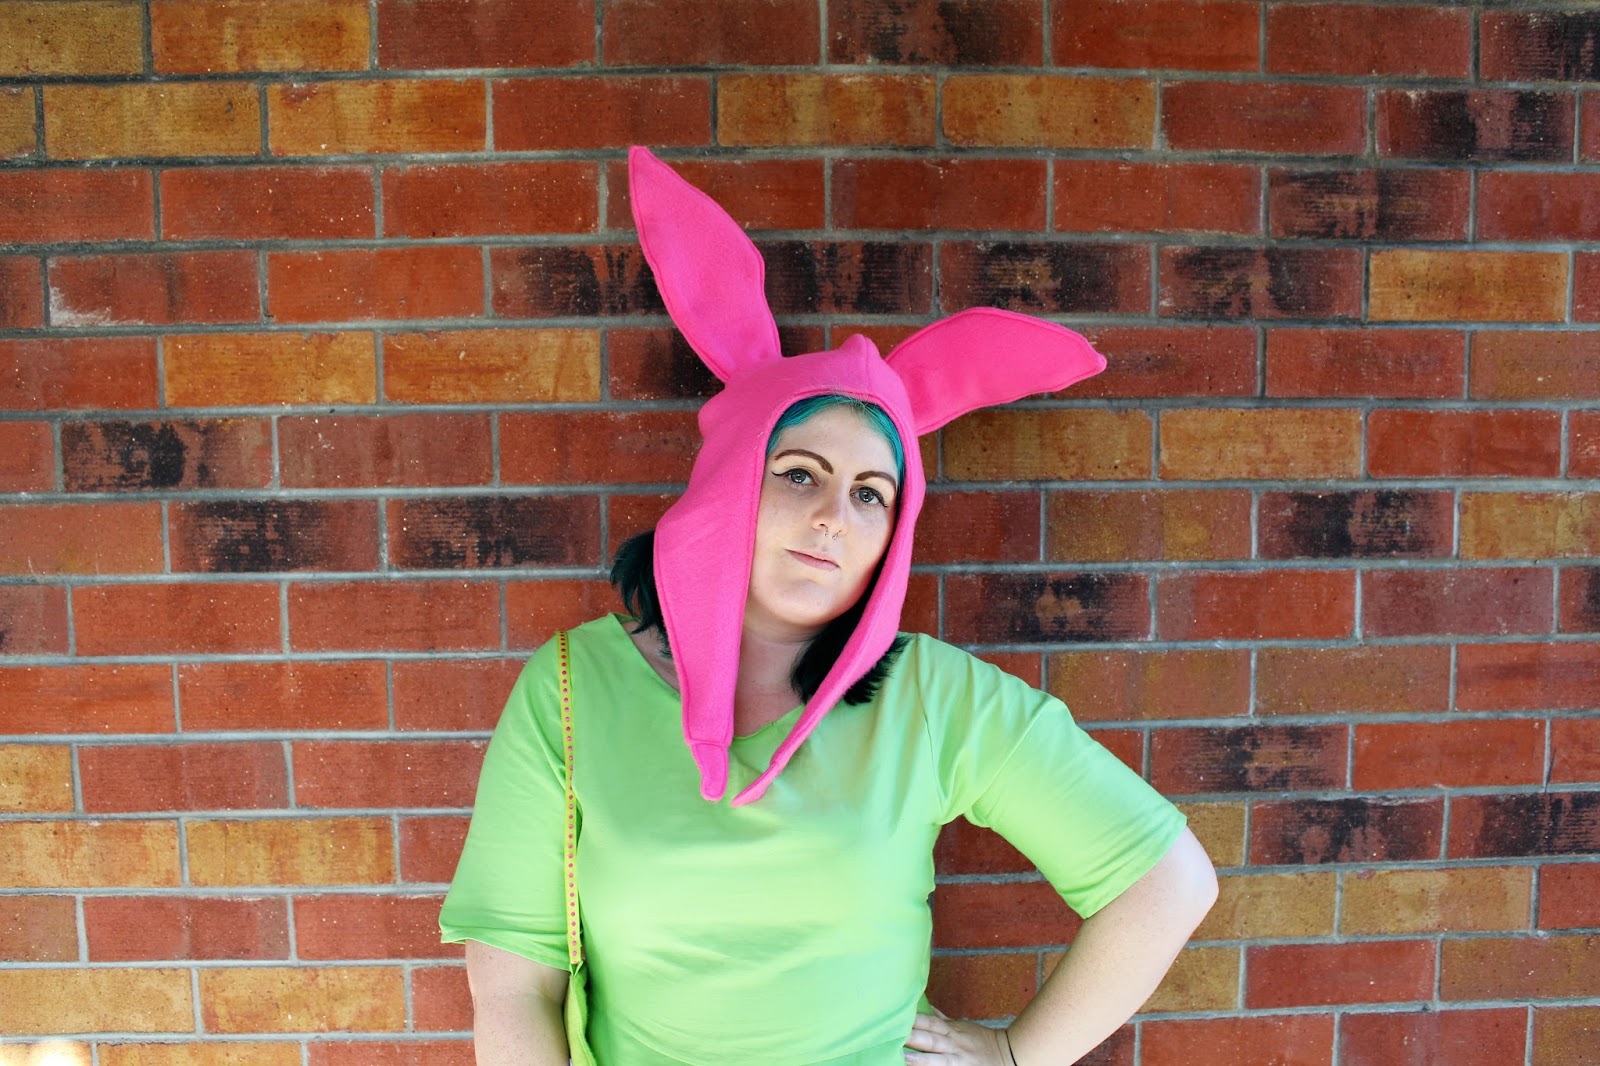 Sew a Louise Belcher / Bob's Burgers Hat : 7 Steps (with Pictures